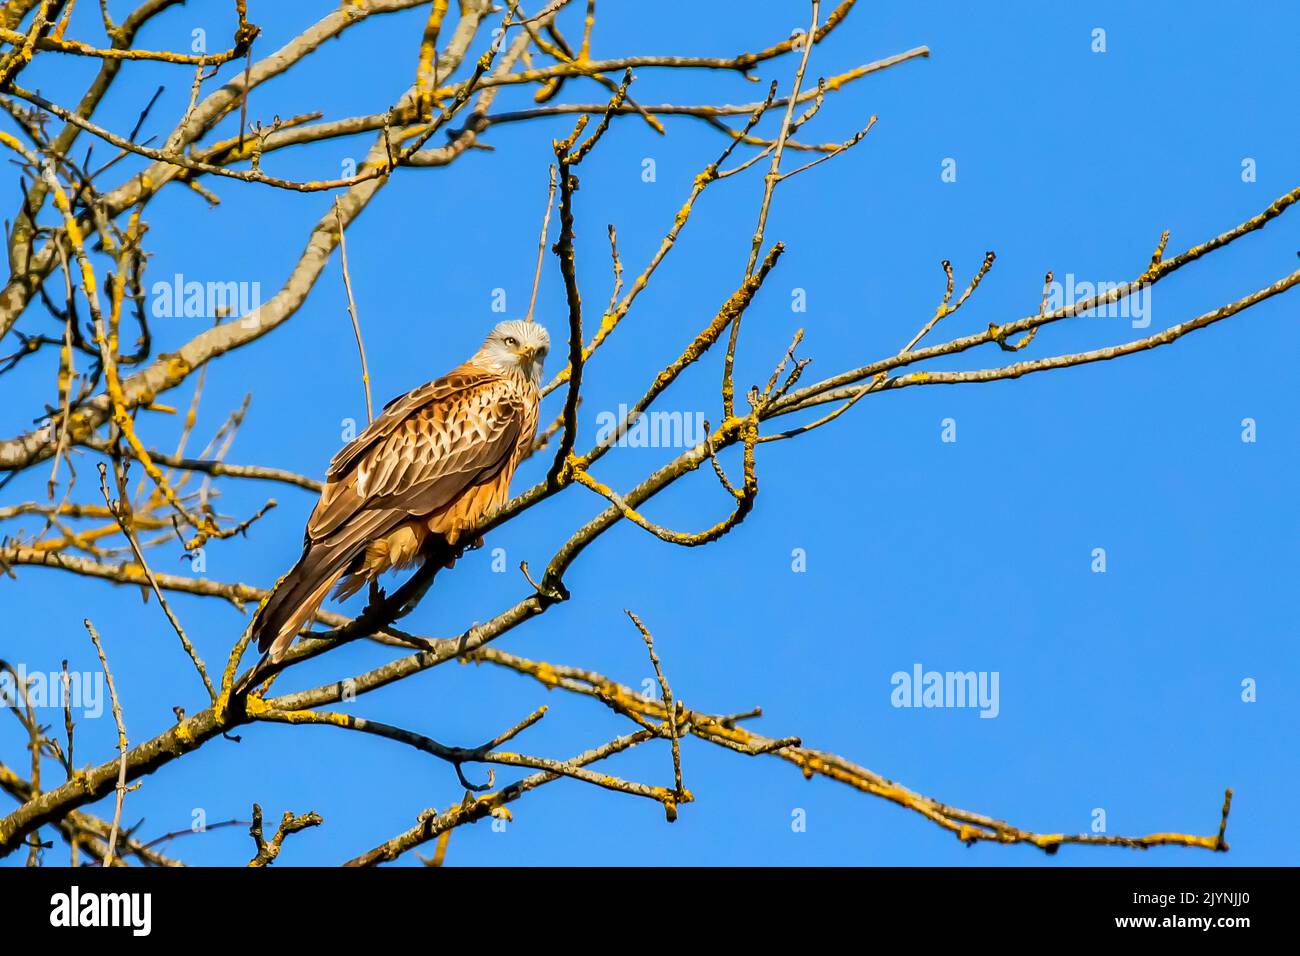 Red kite (Milvus milvus) in a tree against a blue sky in winter, clearing on the edge of a forest, near Toul, Lorraine, France Stock Photo